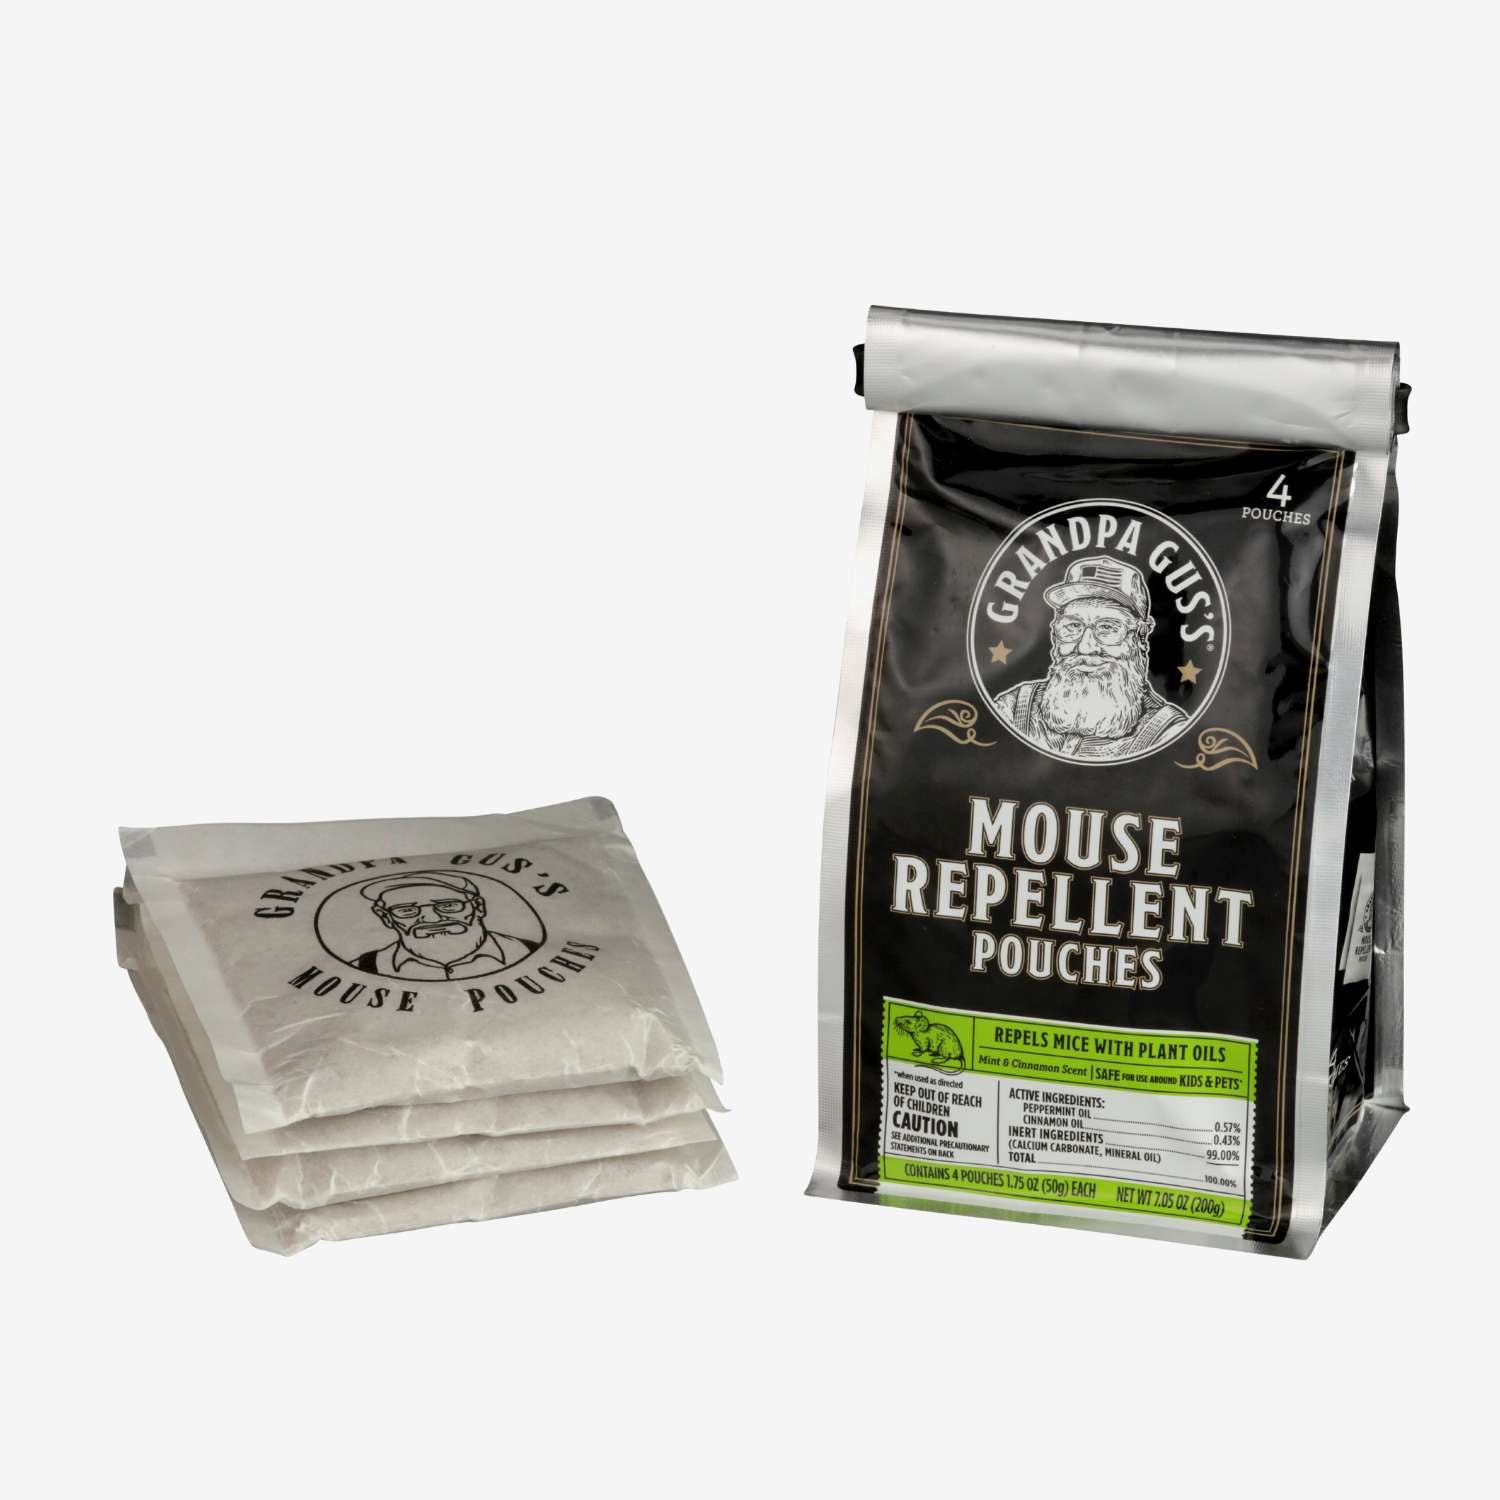  SUAVEC Rodent Repellent, Mice Repellent, Mouse Repellents, Rat  Repellent for House, RV Rodent Repellant, Peppermint Oil to Repel Mice and  Rats, Keep Mice Away for Indoor, Rat Deterrent-8 Packs 